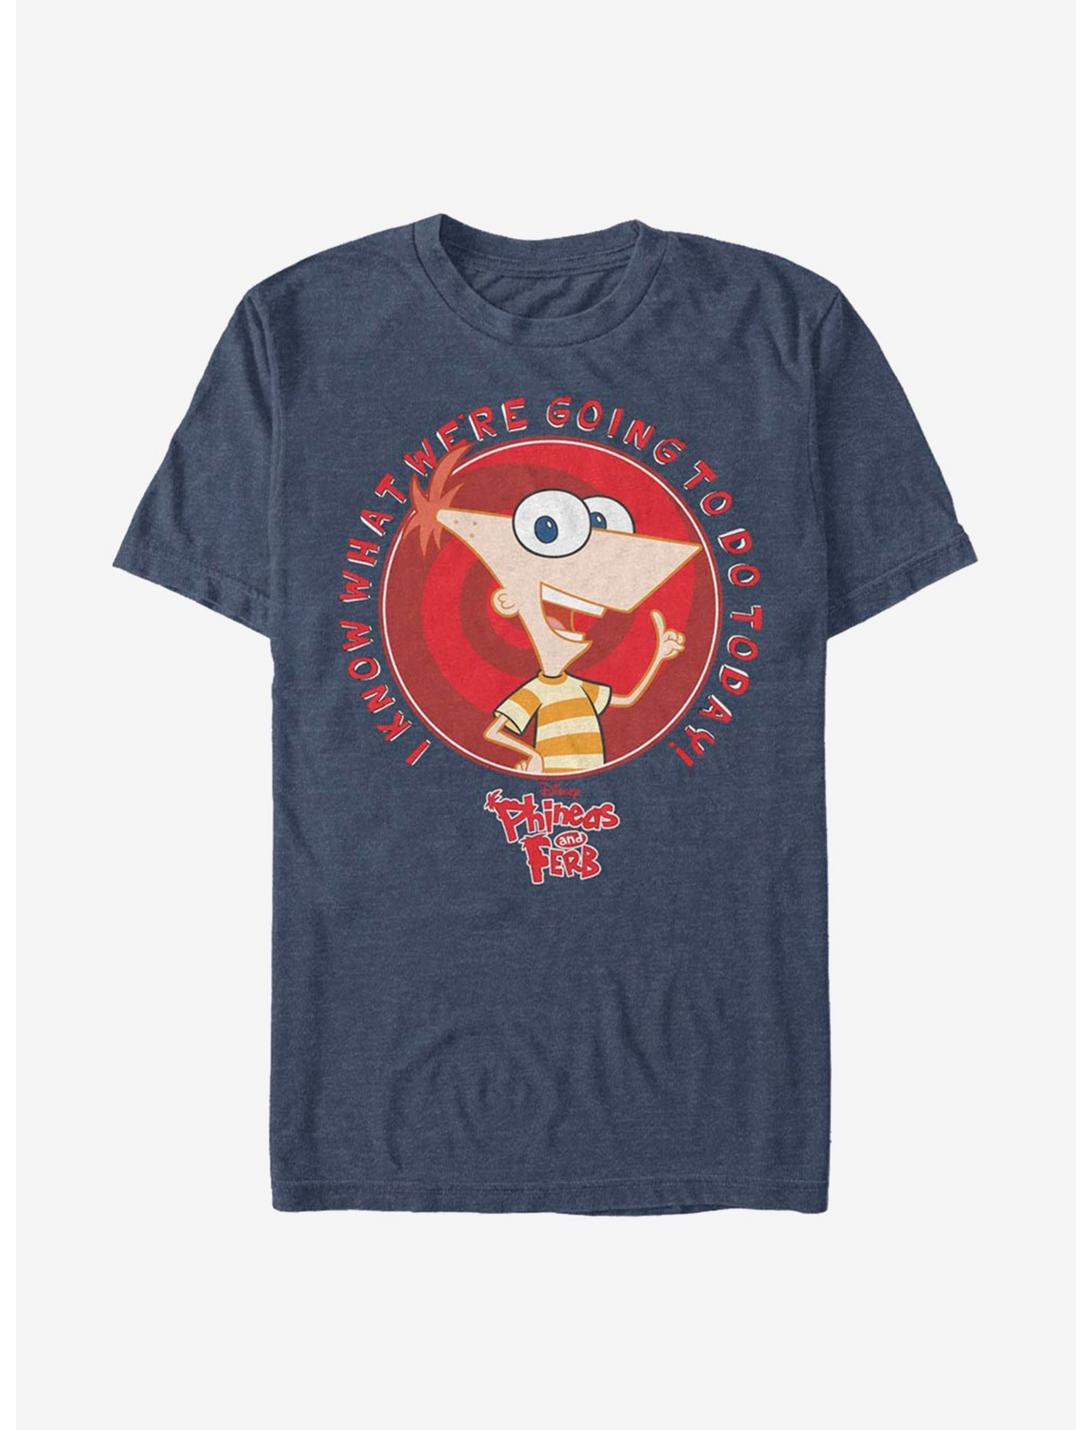 Disney Phineas And Ferb Phineas Do Today T-Shirt, NAVY HTR, hi-res